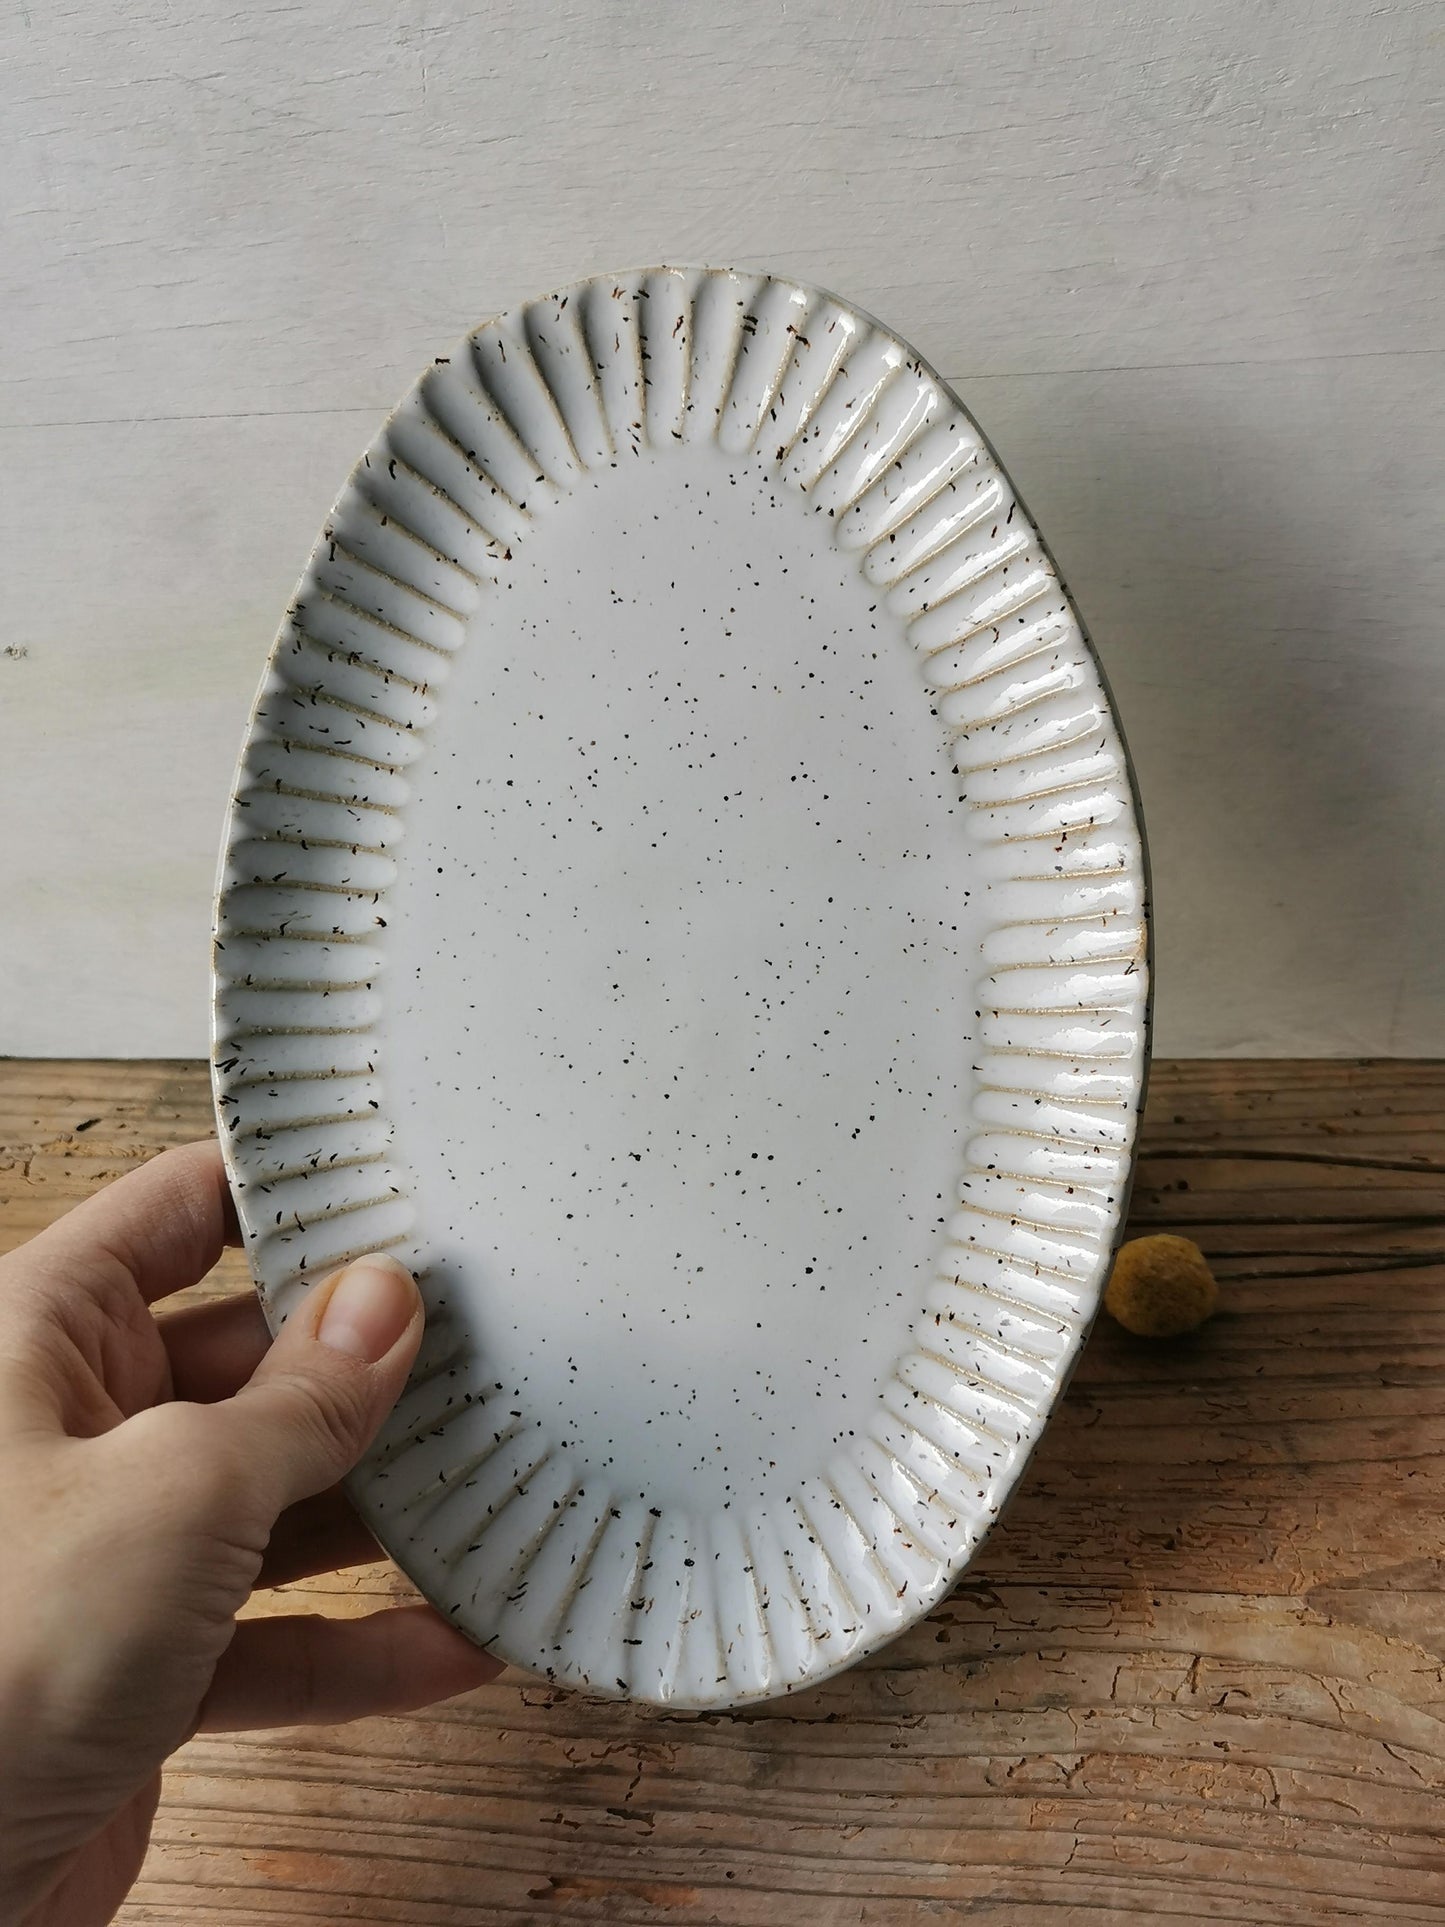 Rustic oval serving platter - small